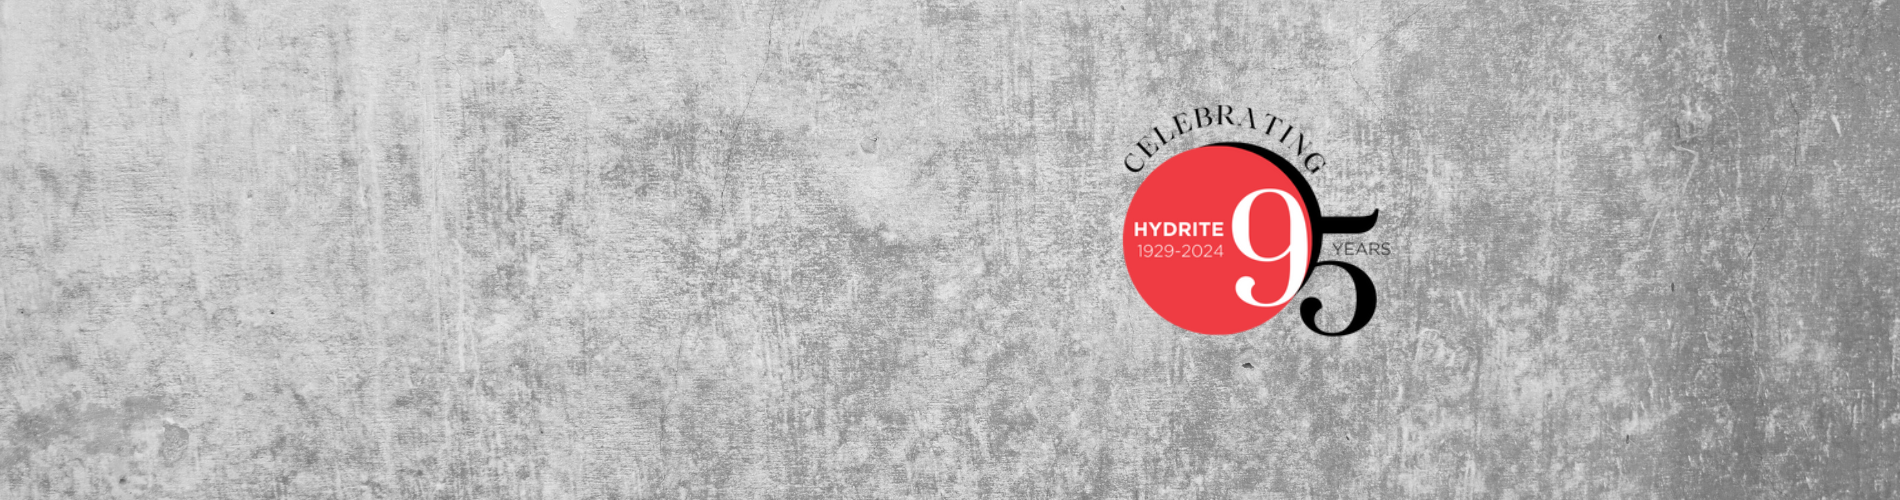 Hydrite 95 Years Logo with Grey Background